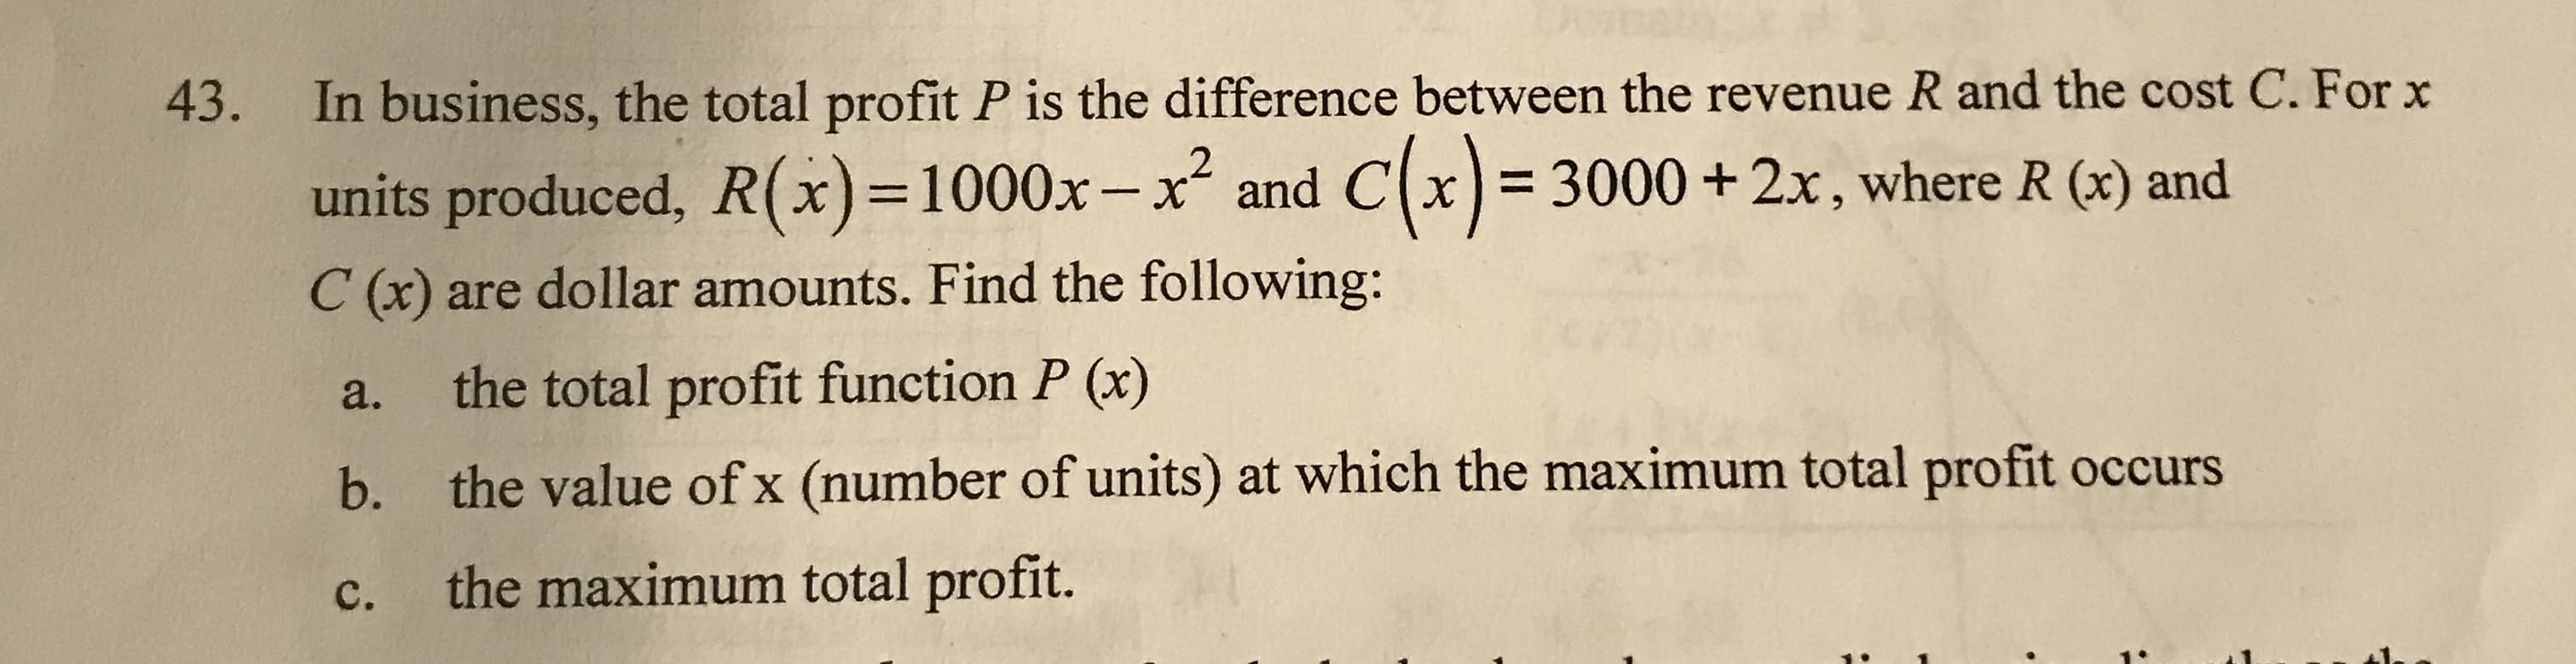 In business, the total profit P is the difference between the revenue R and the cost C. For x
43.
and Cx) = 3000 +2x, where R (x) and
units produced, R(x)=1000x-x²
%3D
%3D
C (x) are dollar amounts. Find the following:
the total profit function P (x)
a.
the value of x (number of units) at which the maximum total profit occurs
b.
the maximum total profit.
C.
